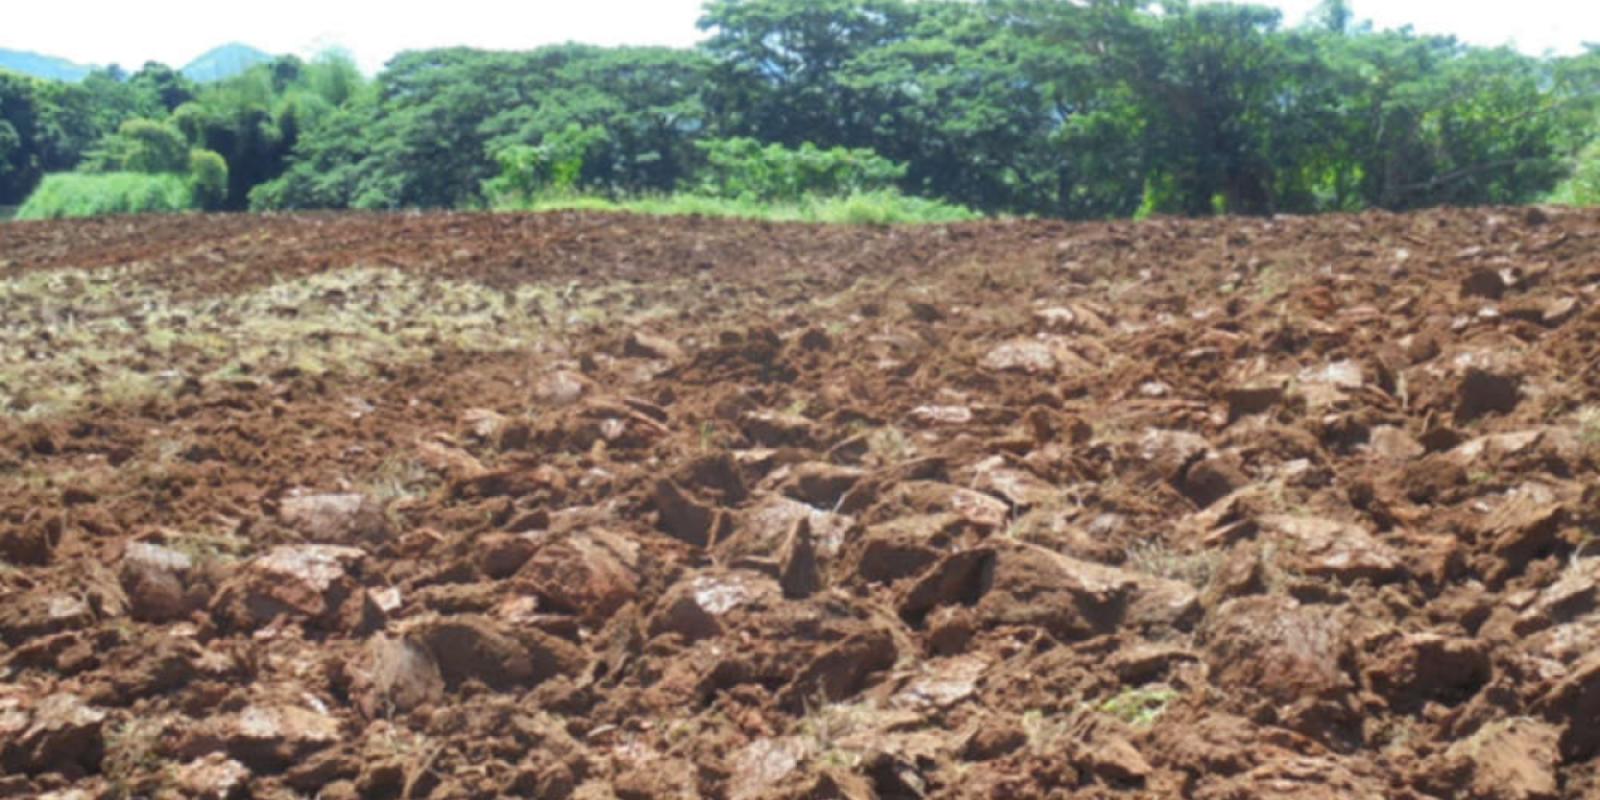 Gaya Prasad’s fallow field into which he has ploughed the cowpea crop